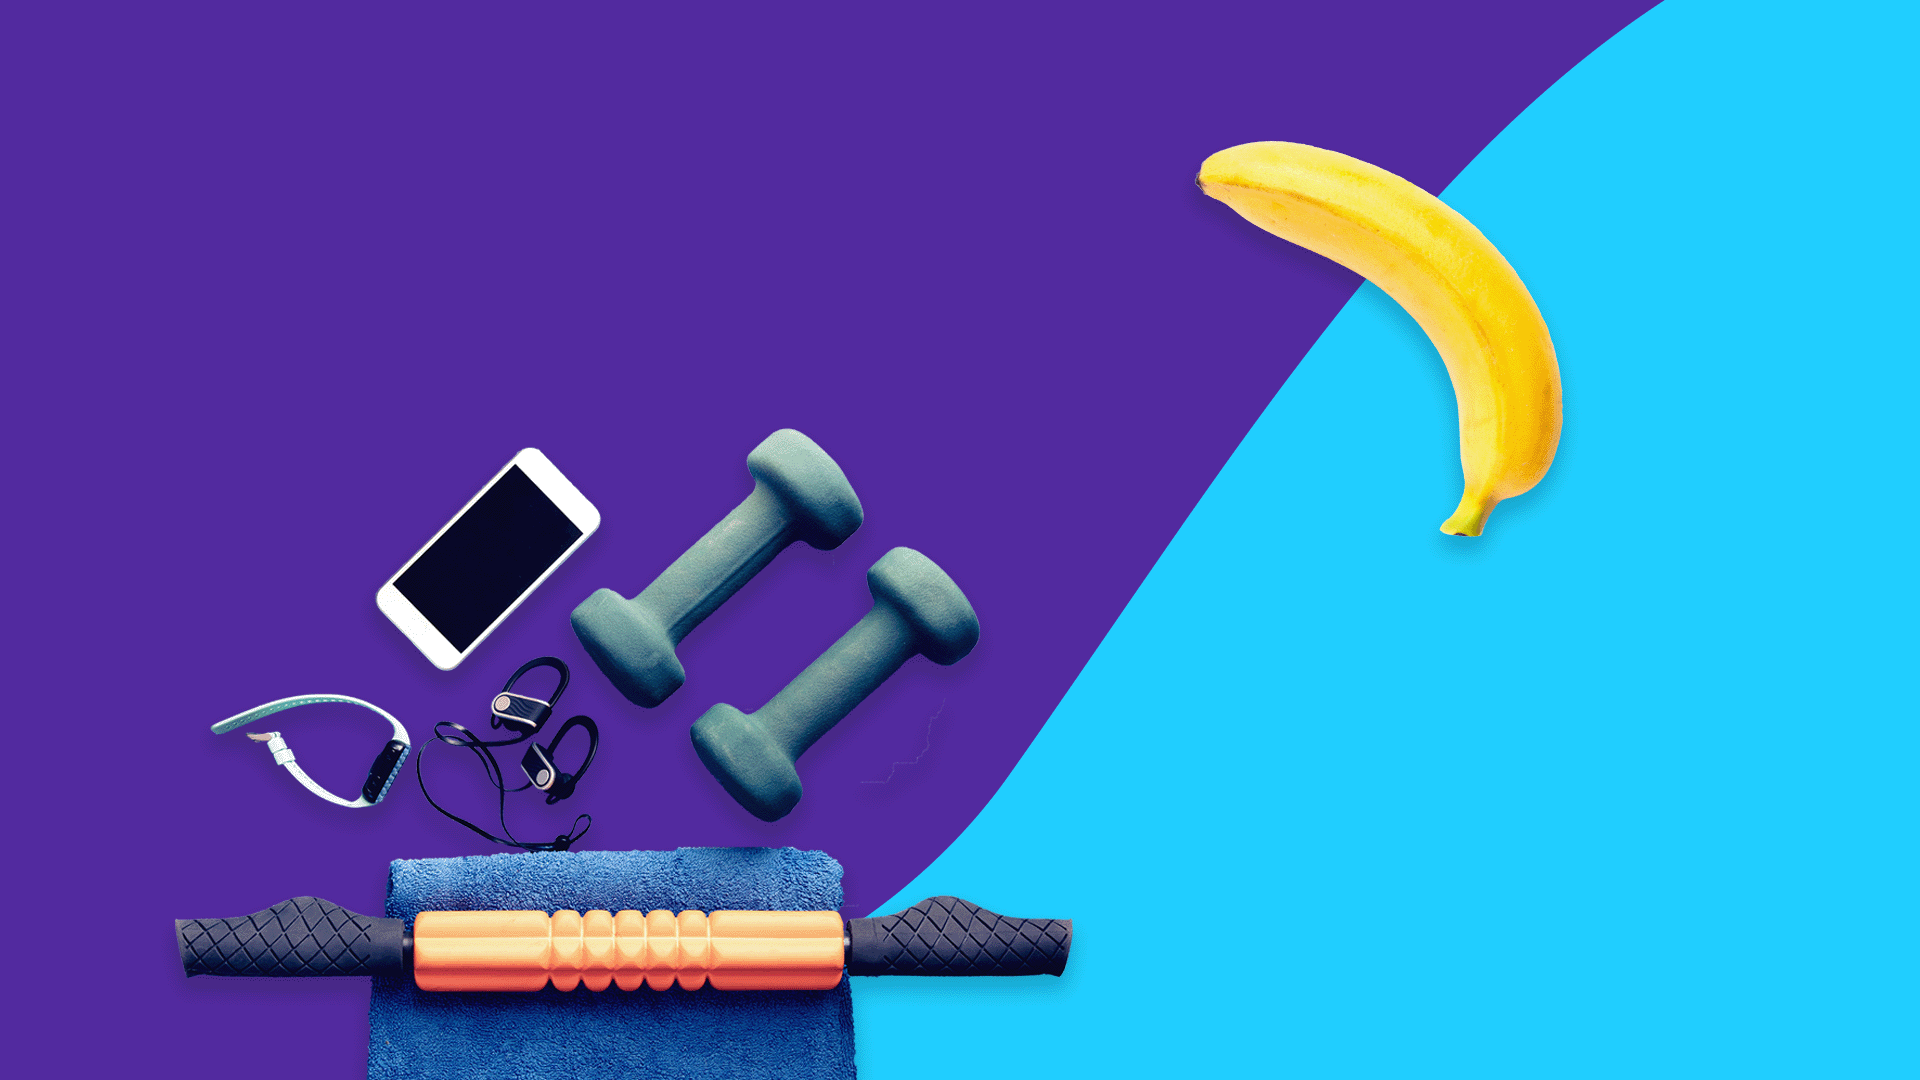 free weights, cell phone and yoga mat - erectile dysfunction physical exercise